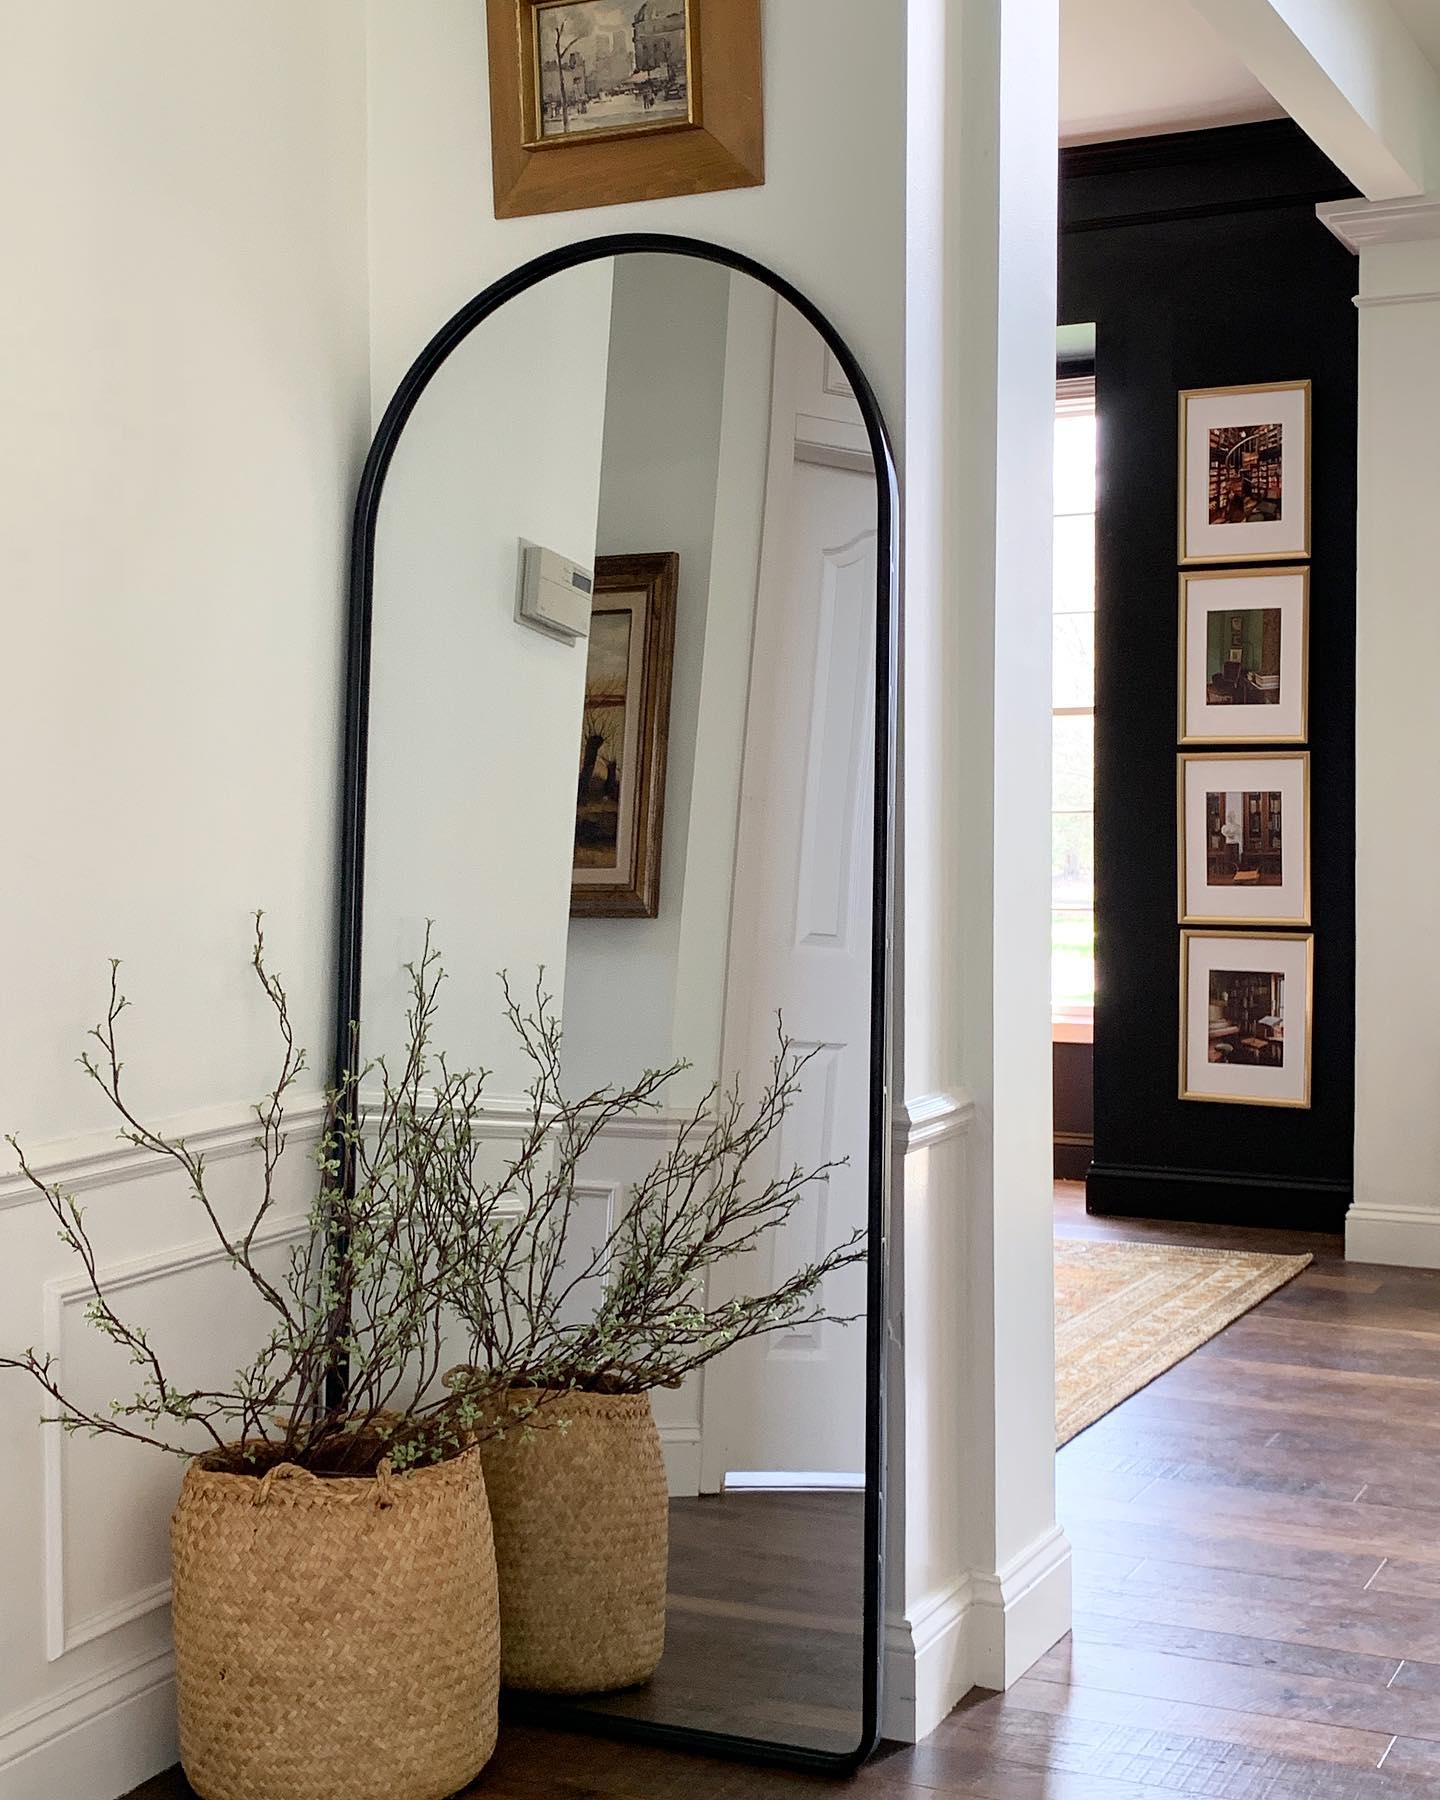 Refreshed a little corner in our entry with new pieces from @allmodern! Love the scale of this arched mirror, and the basket actually comes as a set of two. I’m using the larger one in our family room to store blankets, and here, the smaller one is perfect for some stems.👏🏼 Take advantage of their fast and free shipping! Learn more sbout @allmodern’s product via the @shop.ltk app. I’ve linked these items here➡️ https://liketk.it/3FqbK #ad #allmodernpartner #summerwithallmodern